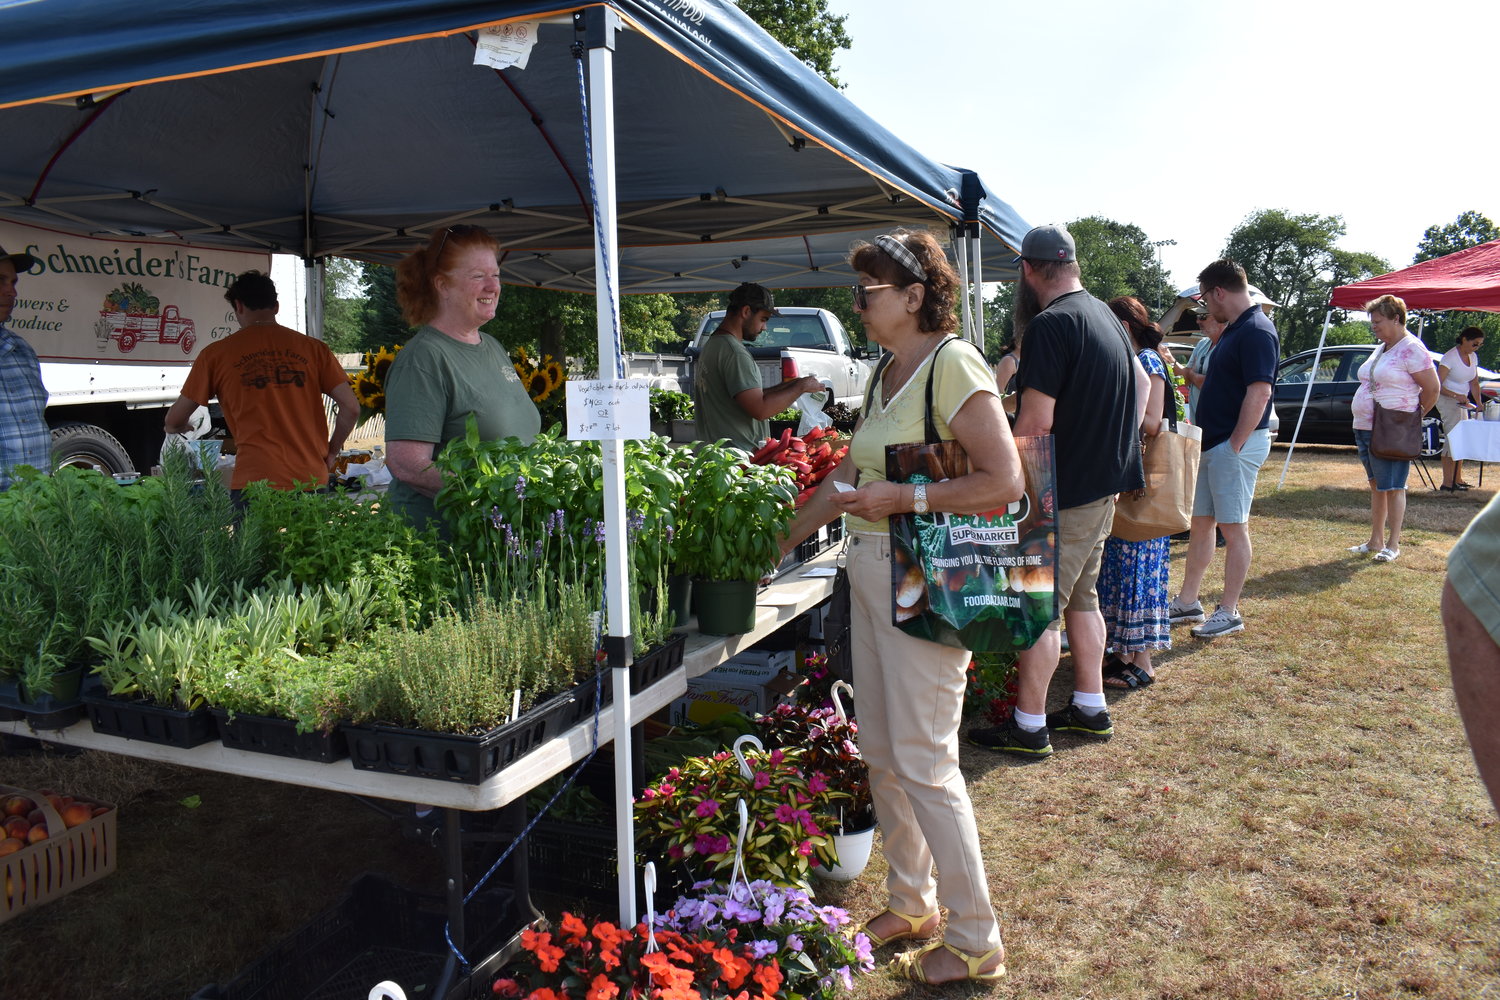 The Cornell Cooperative Extension of Nassau hosts its farmers markets on Saturdays in Eisenhower Park. Fresh produce is available from numerous vendors across Long Island.